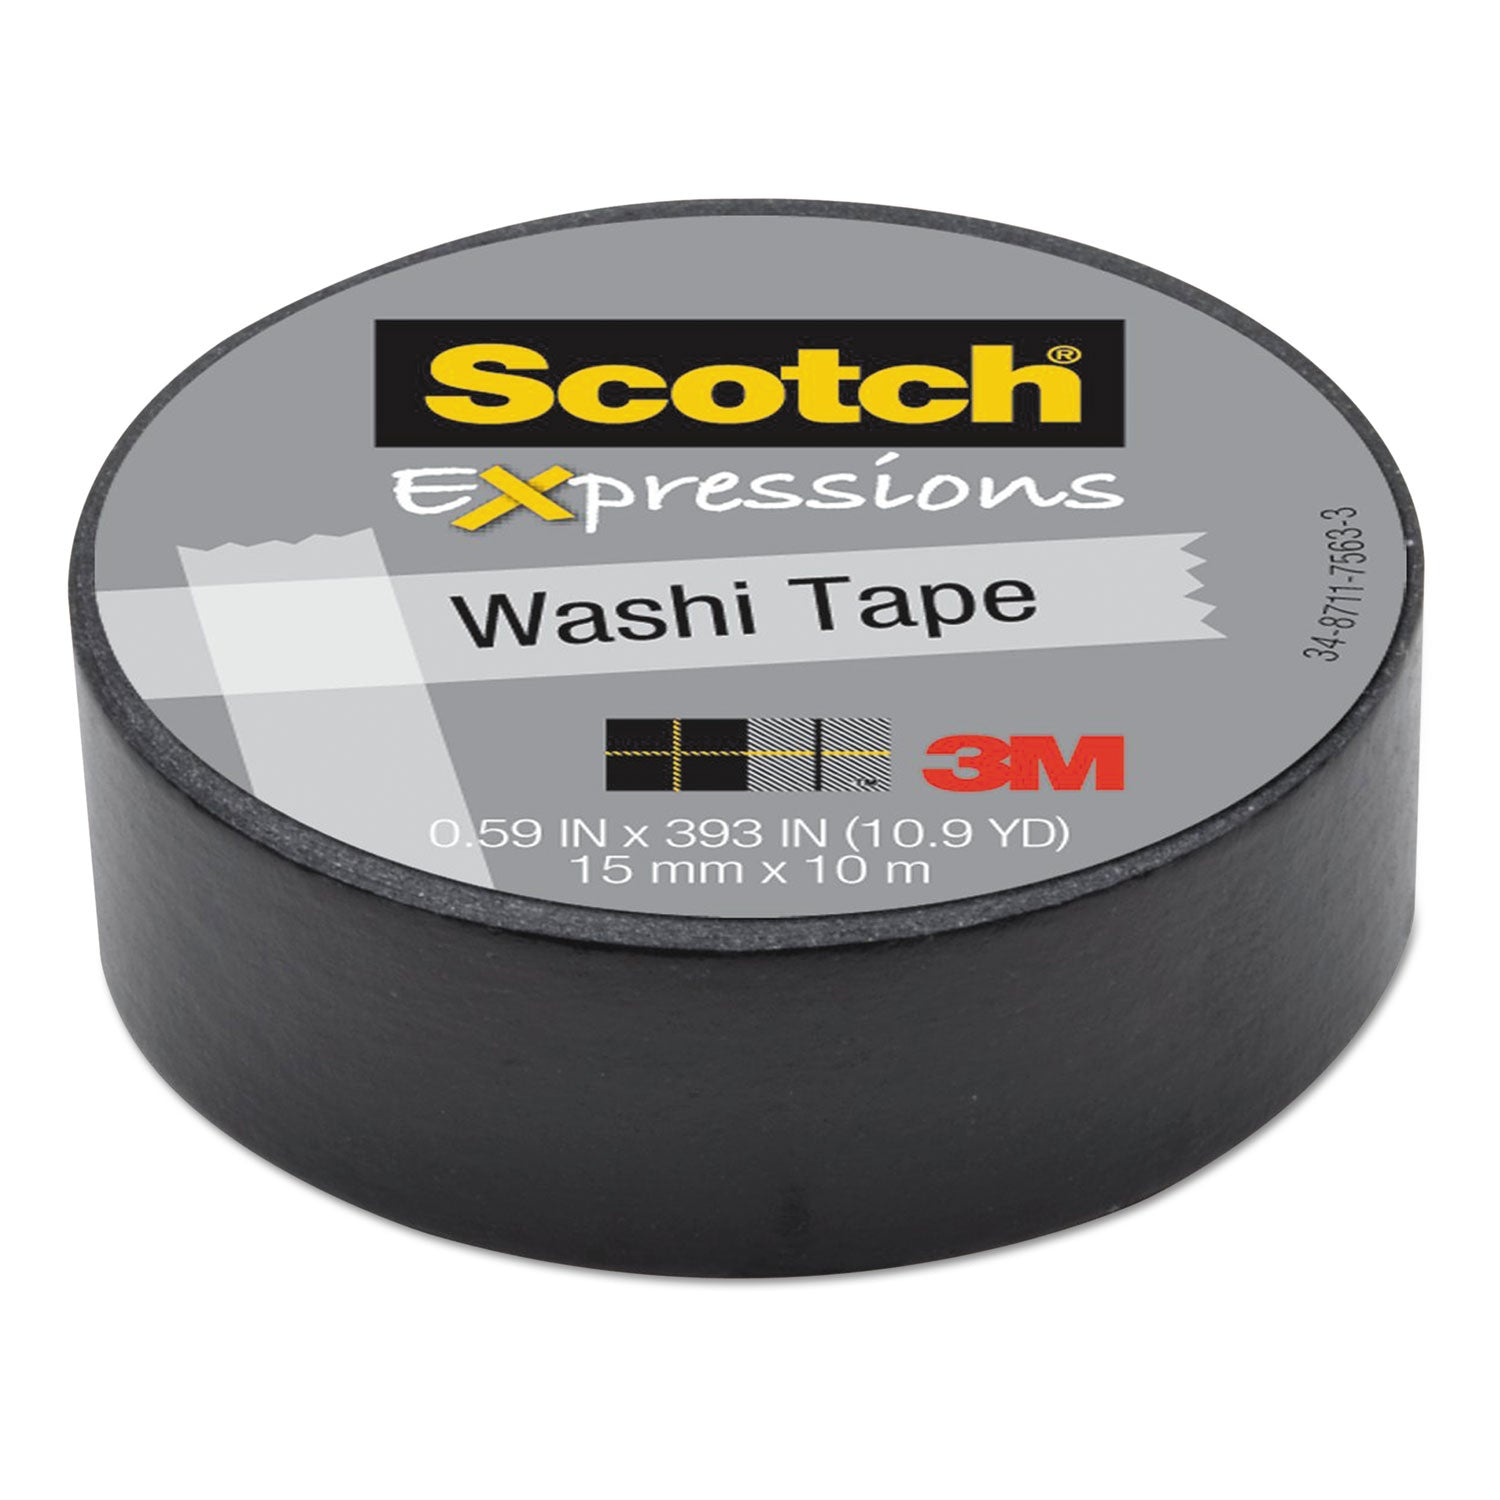 Expressions Washi Tape, 1.25" Core, 0.59" x 32.75 ft, Black - 